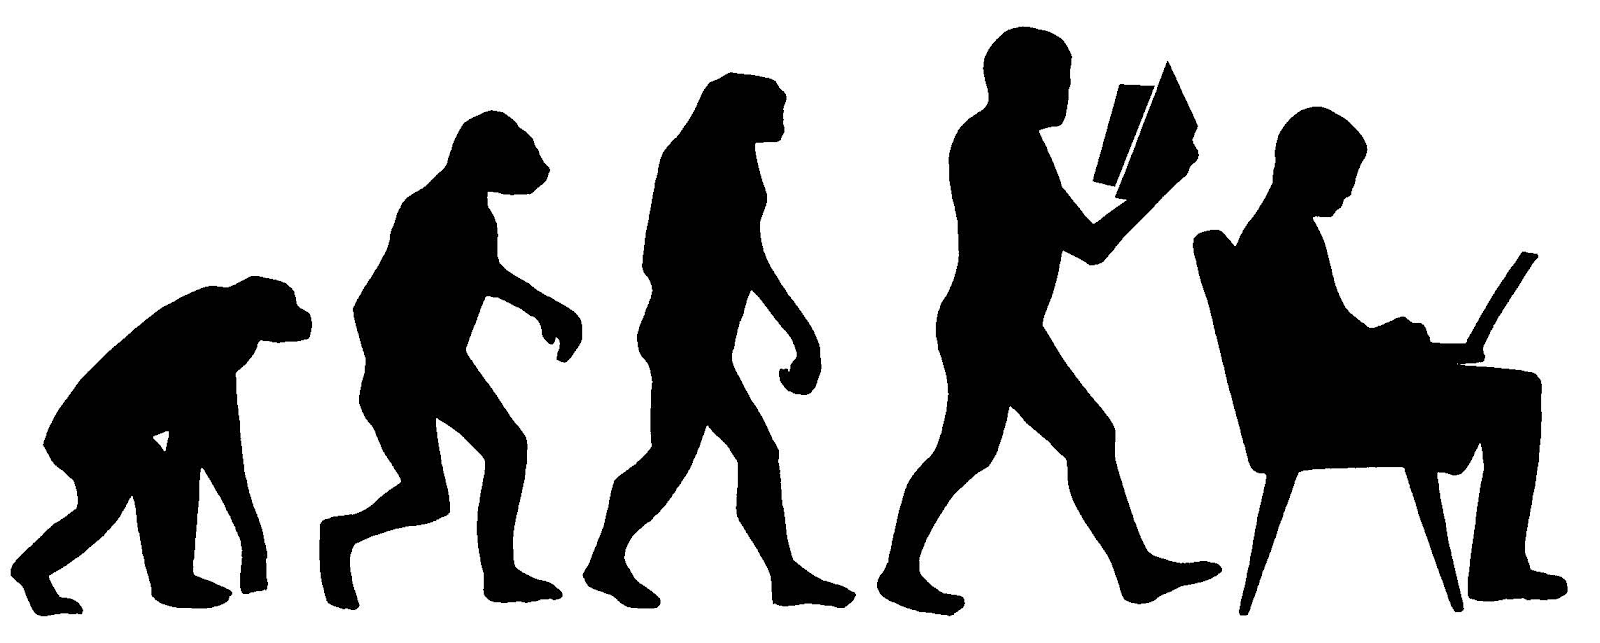 classic evolution progression of monkey to man, but with the ending state being a guy on a laptop